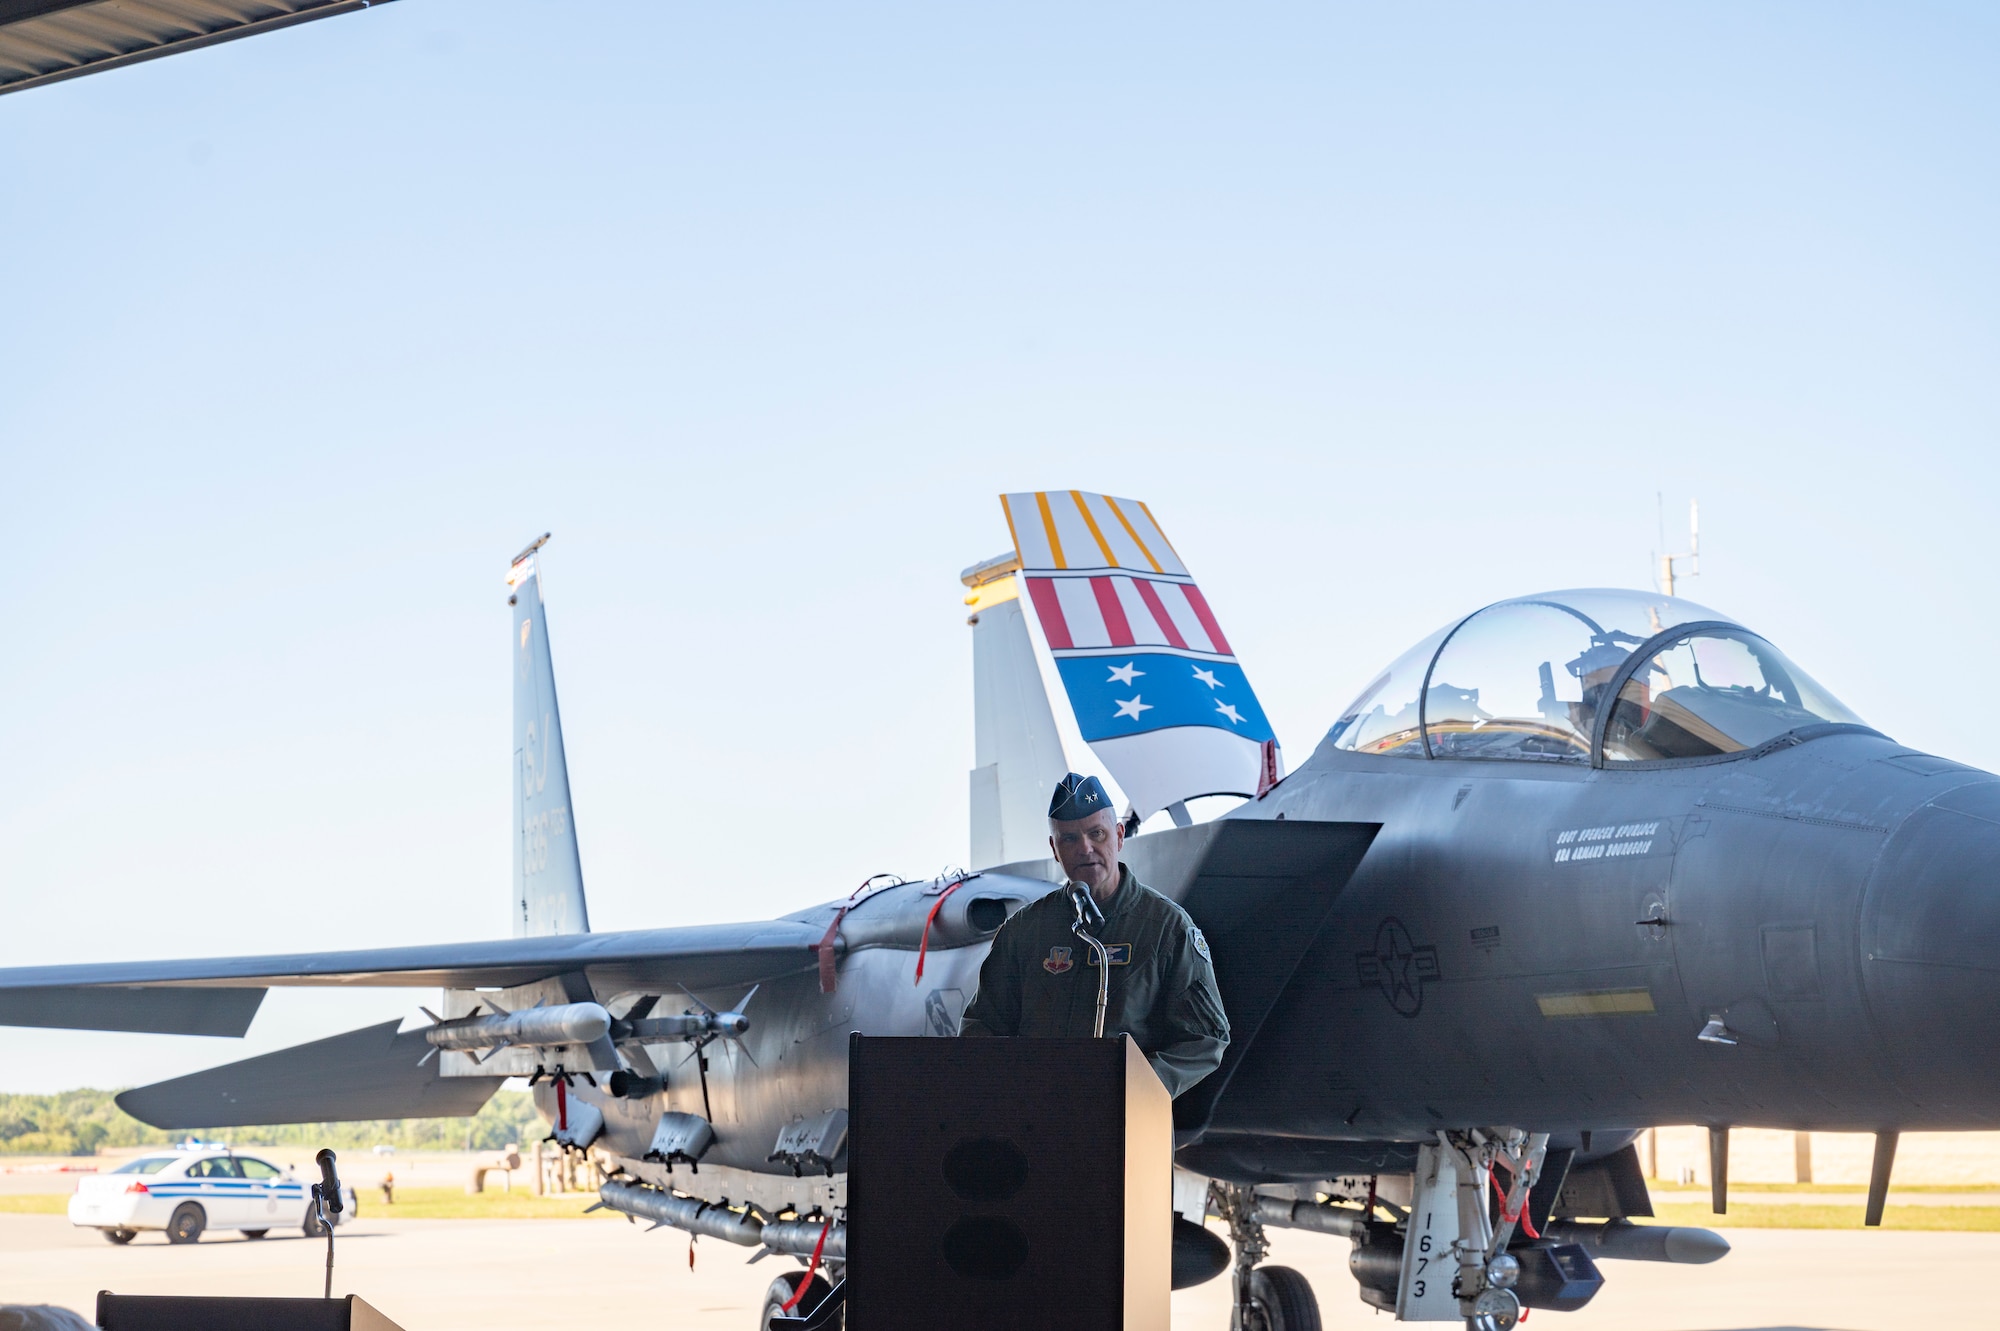 Maj. Gen. Michael G. Koscheski, Fifteenth Air Force commander, speaks during the 4th Fighter Wing Change of Command ceremony at Seymour Johnson Air Force Base, North Carolina, May 11, 2022. The Change of Command ceremony is a military tradition that represents a formal transfer of authority and responsibility of a unit from one commanding officer to another. (U.S. Air Force photo by Senior Airman Kimberly Barrera)